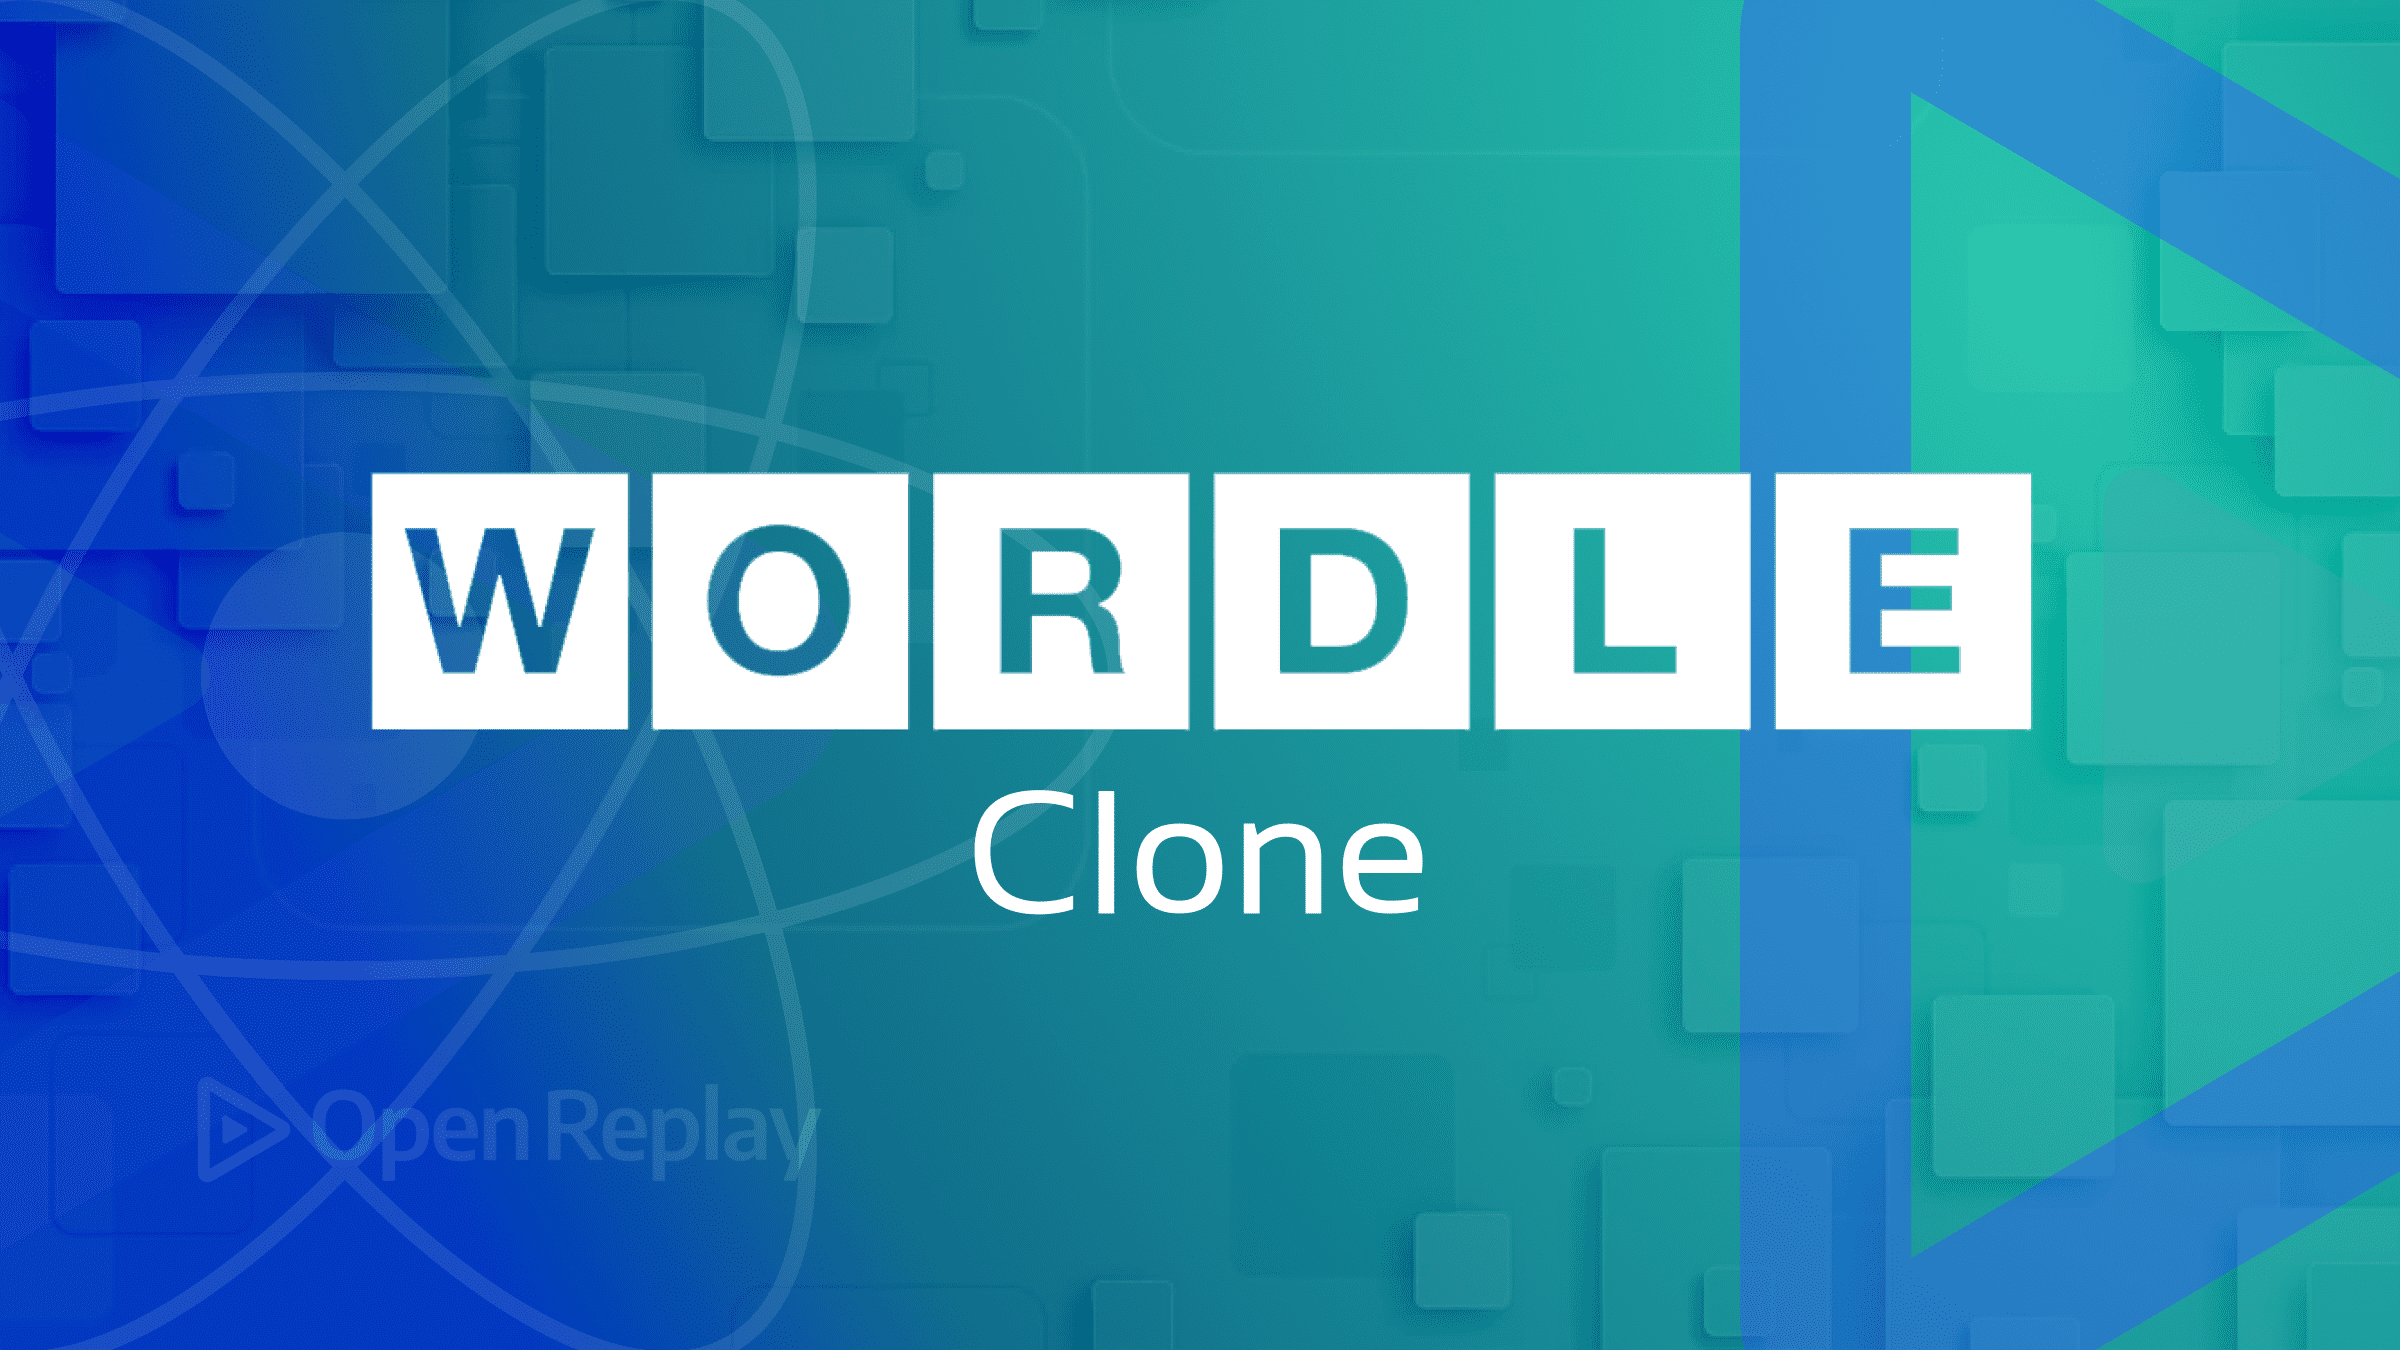 Building a Wordle clone using React